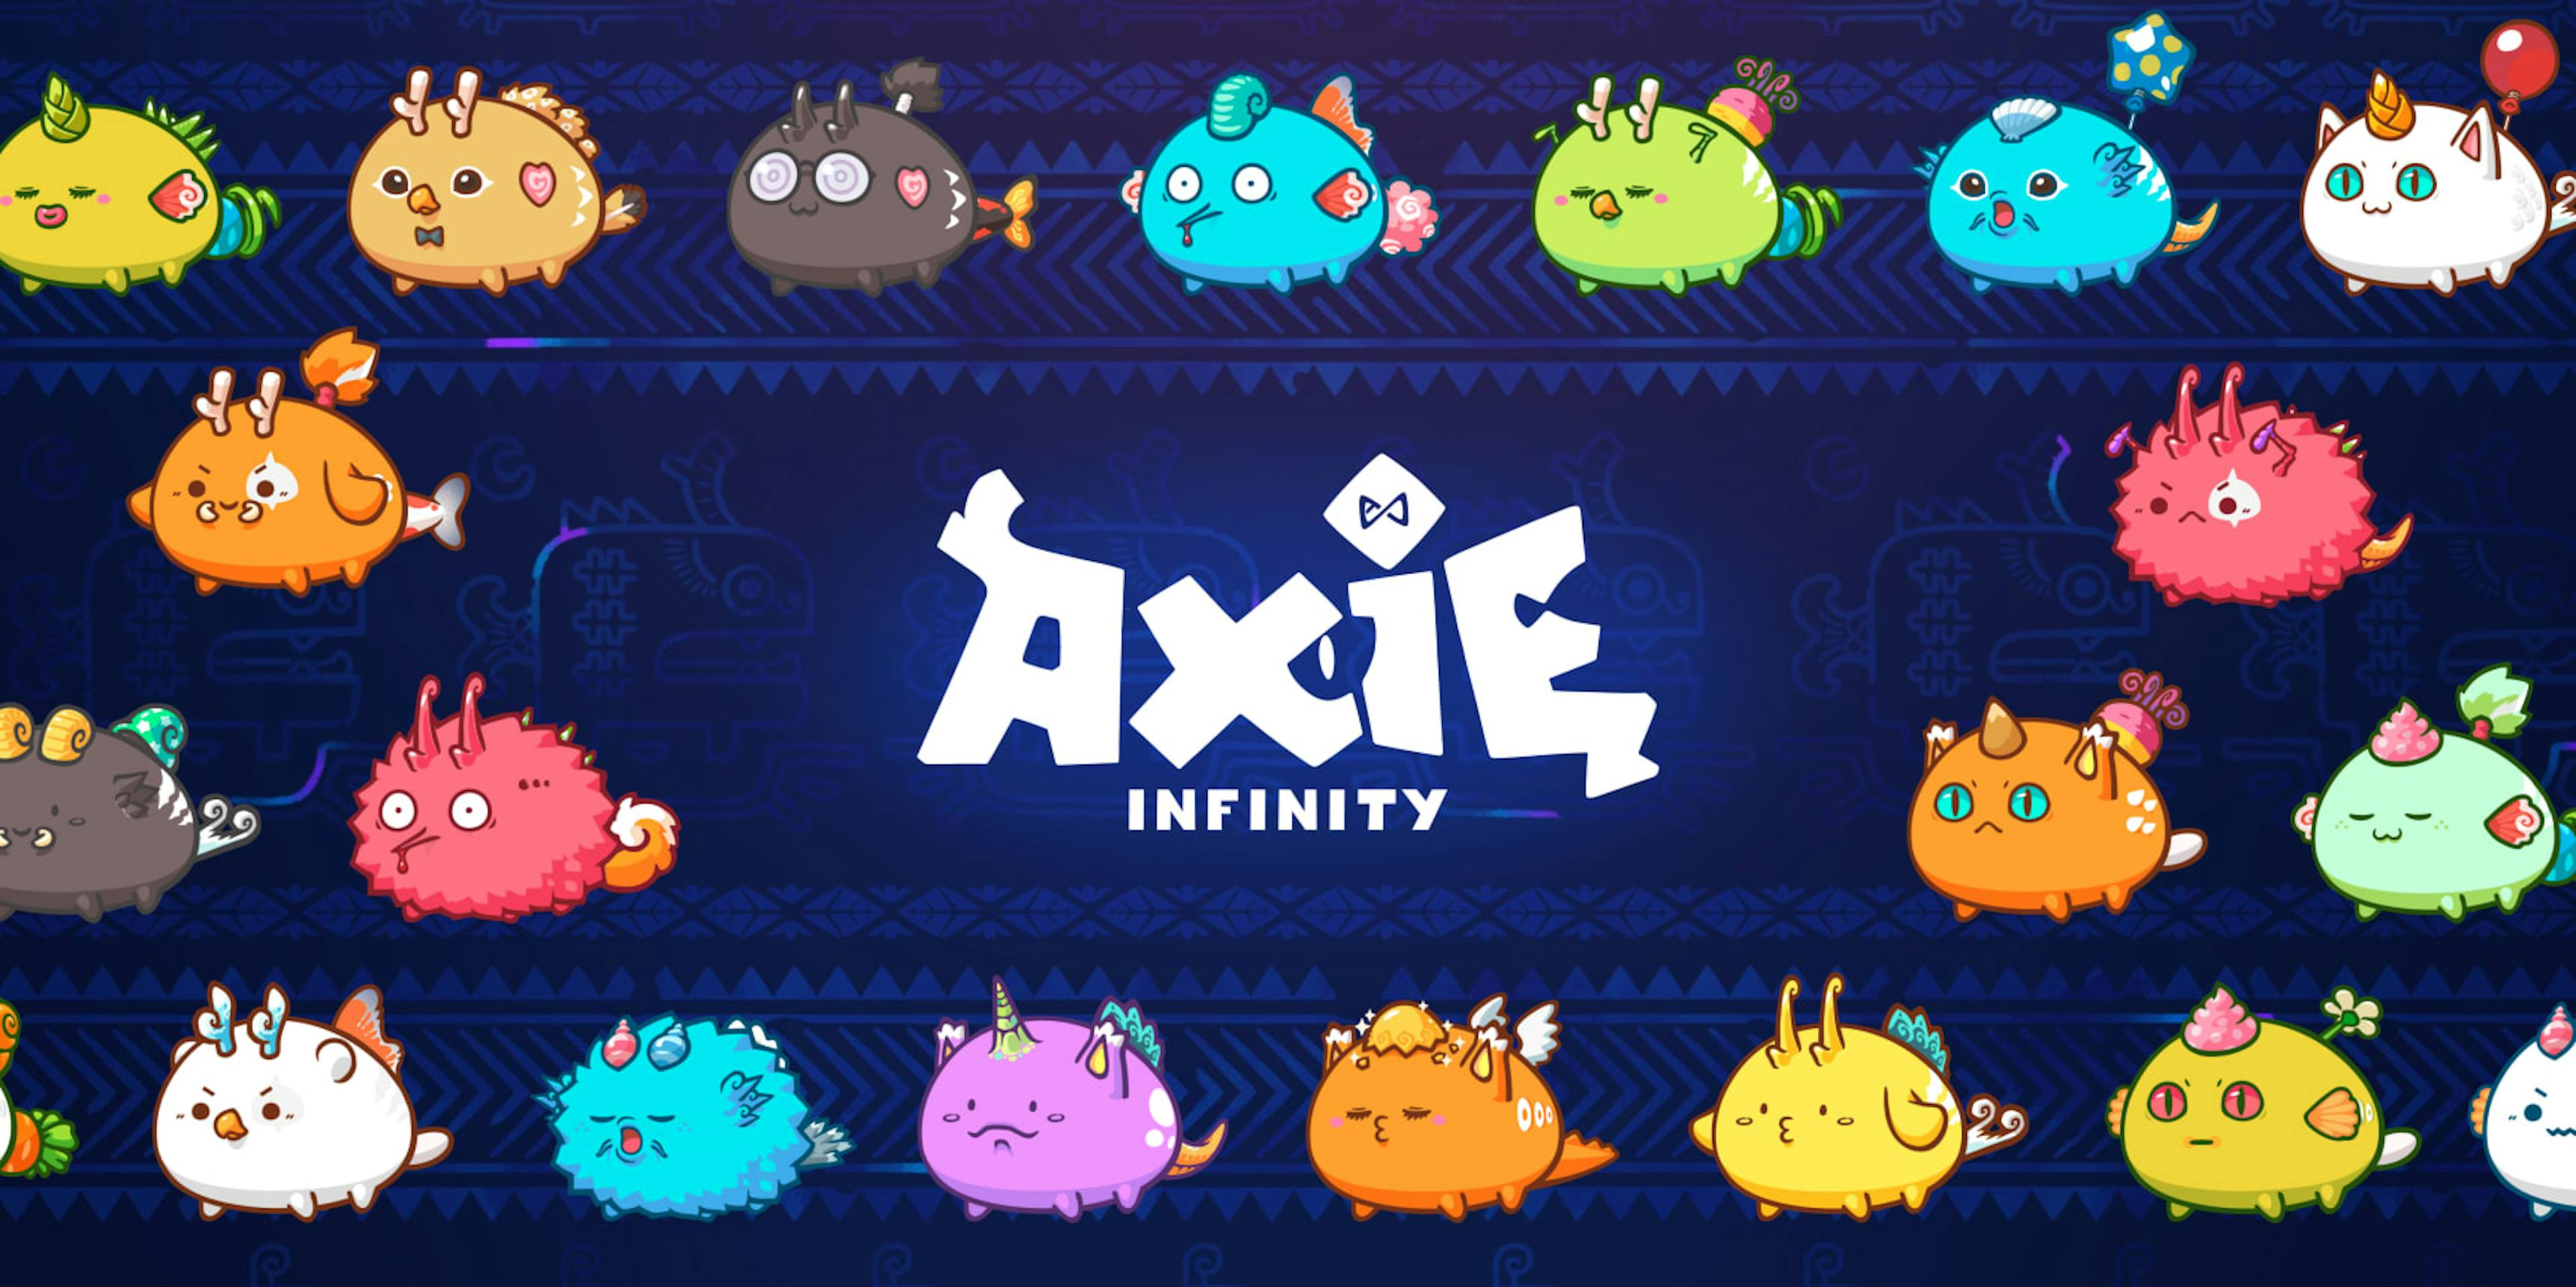 The NFT-based game Axie Infinity is one of the largest contributors to this trend.